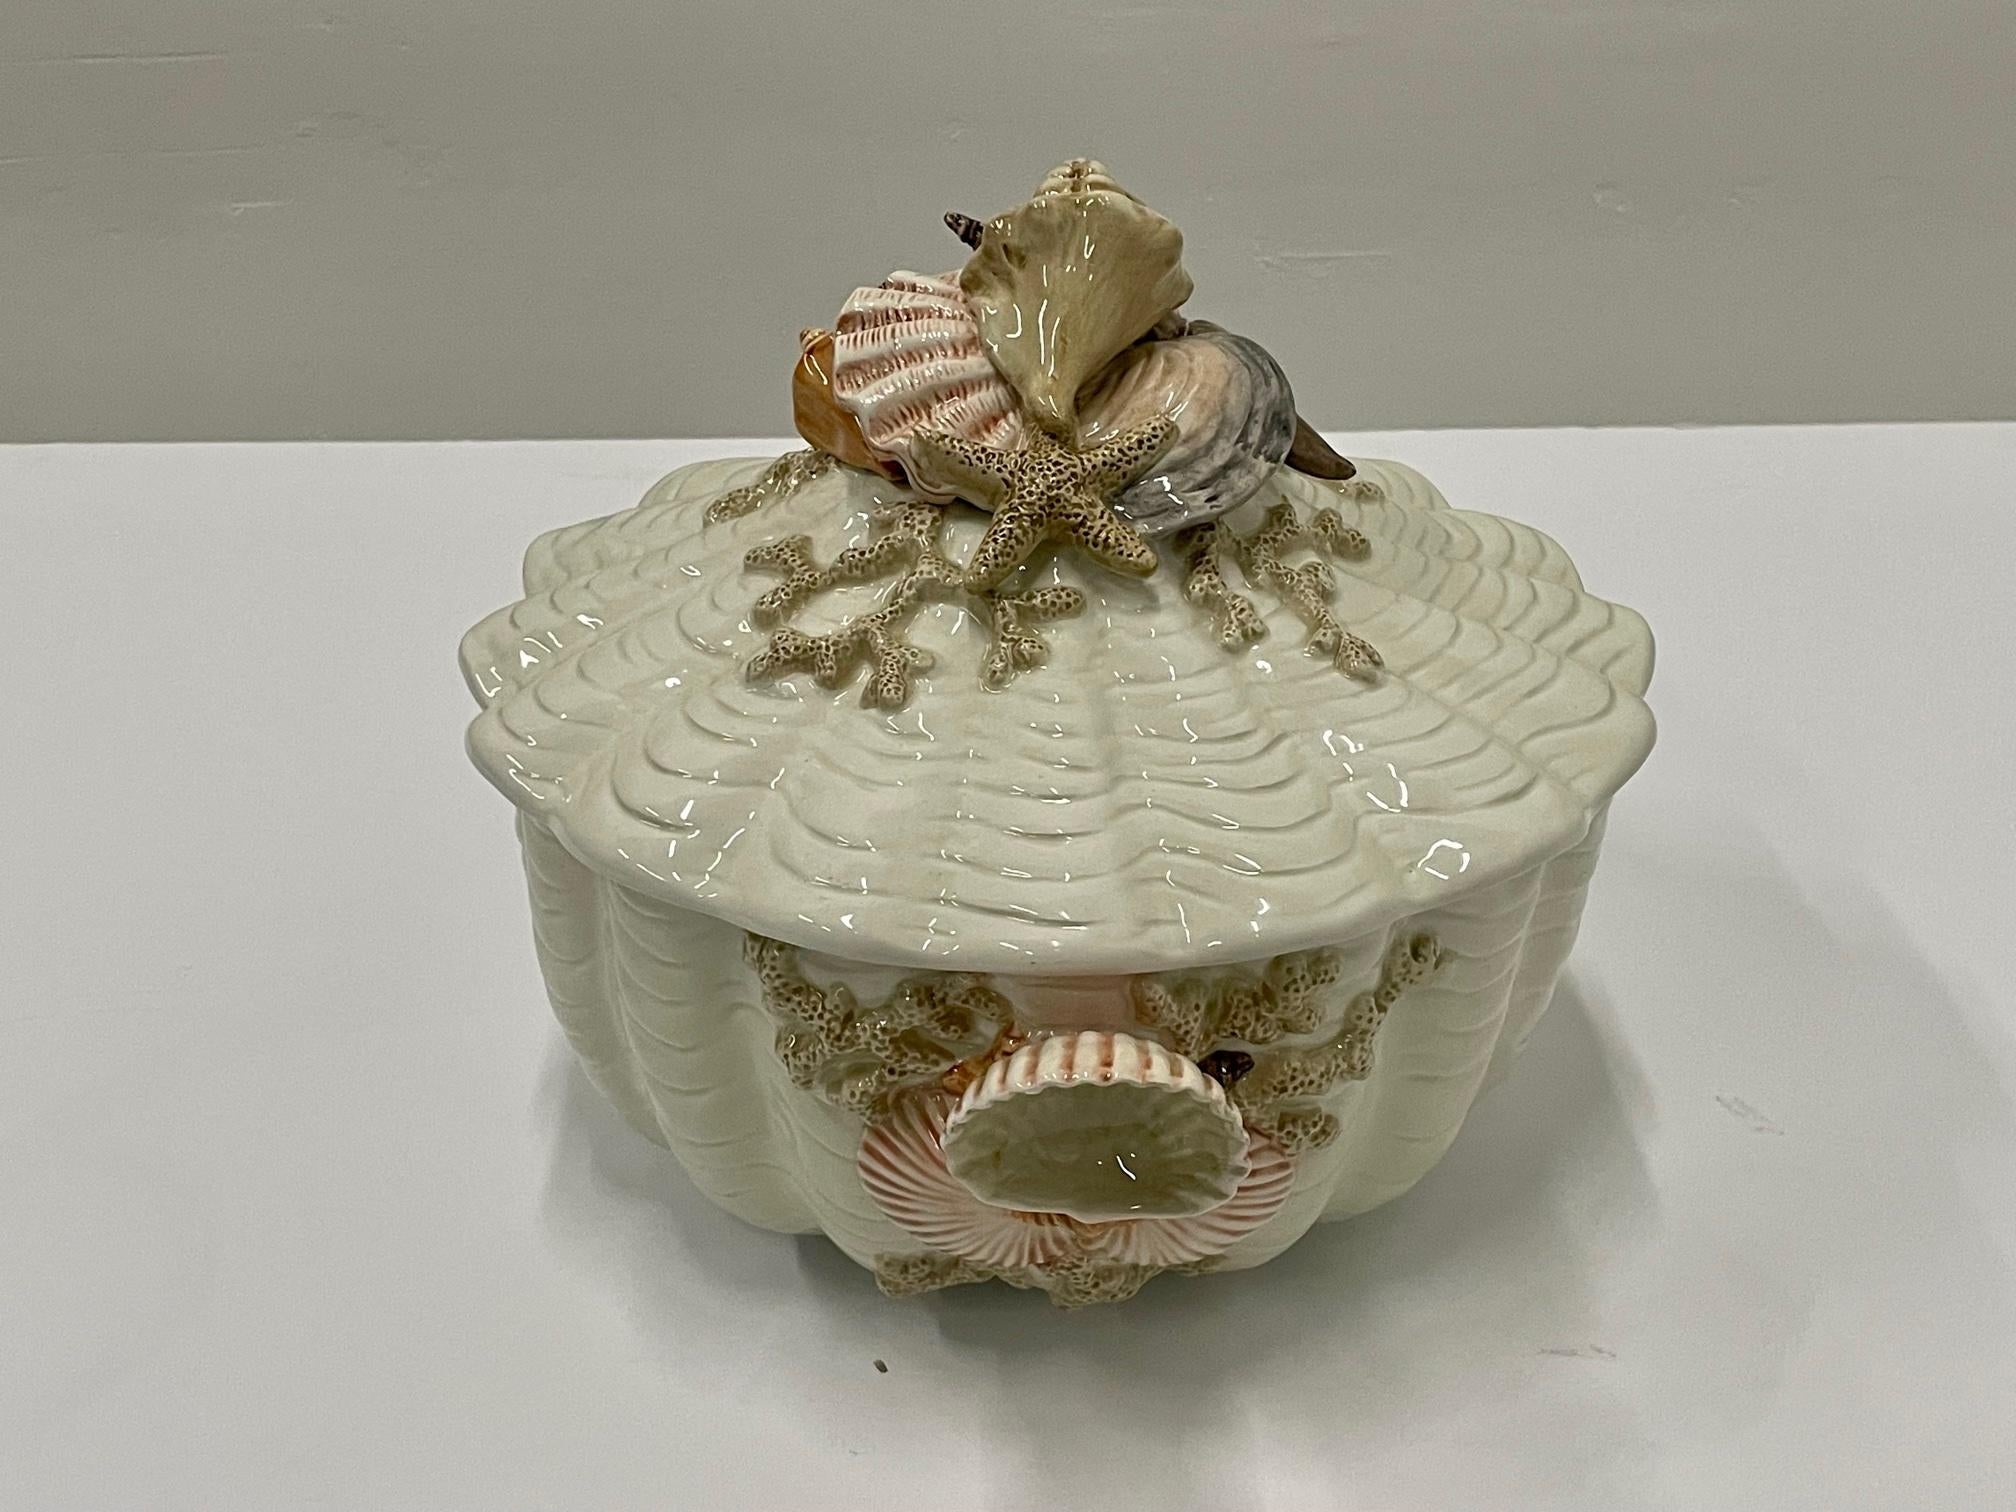 Lovely meticulously detailed Fitz & Floyd tureen having amazing shell decoration on the top of the lid and handles.